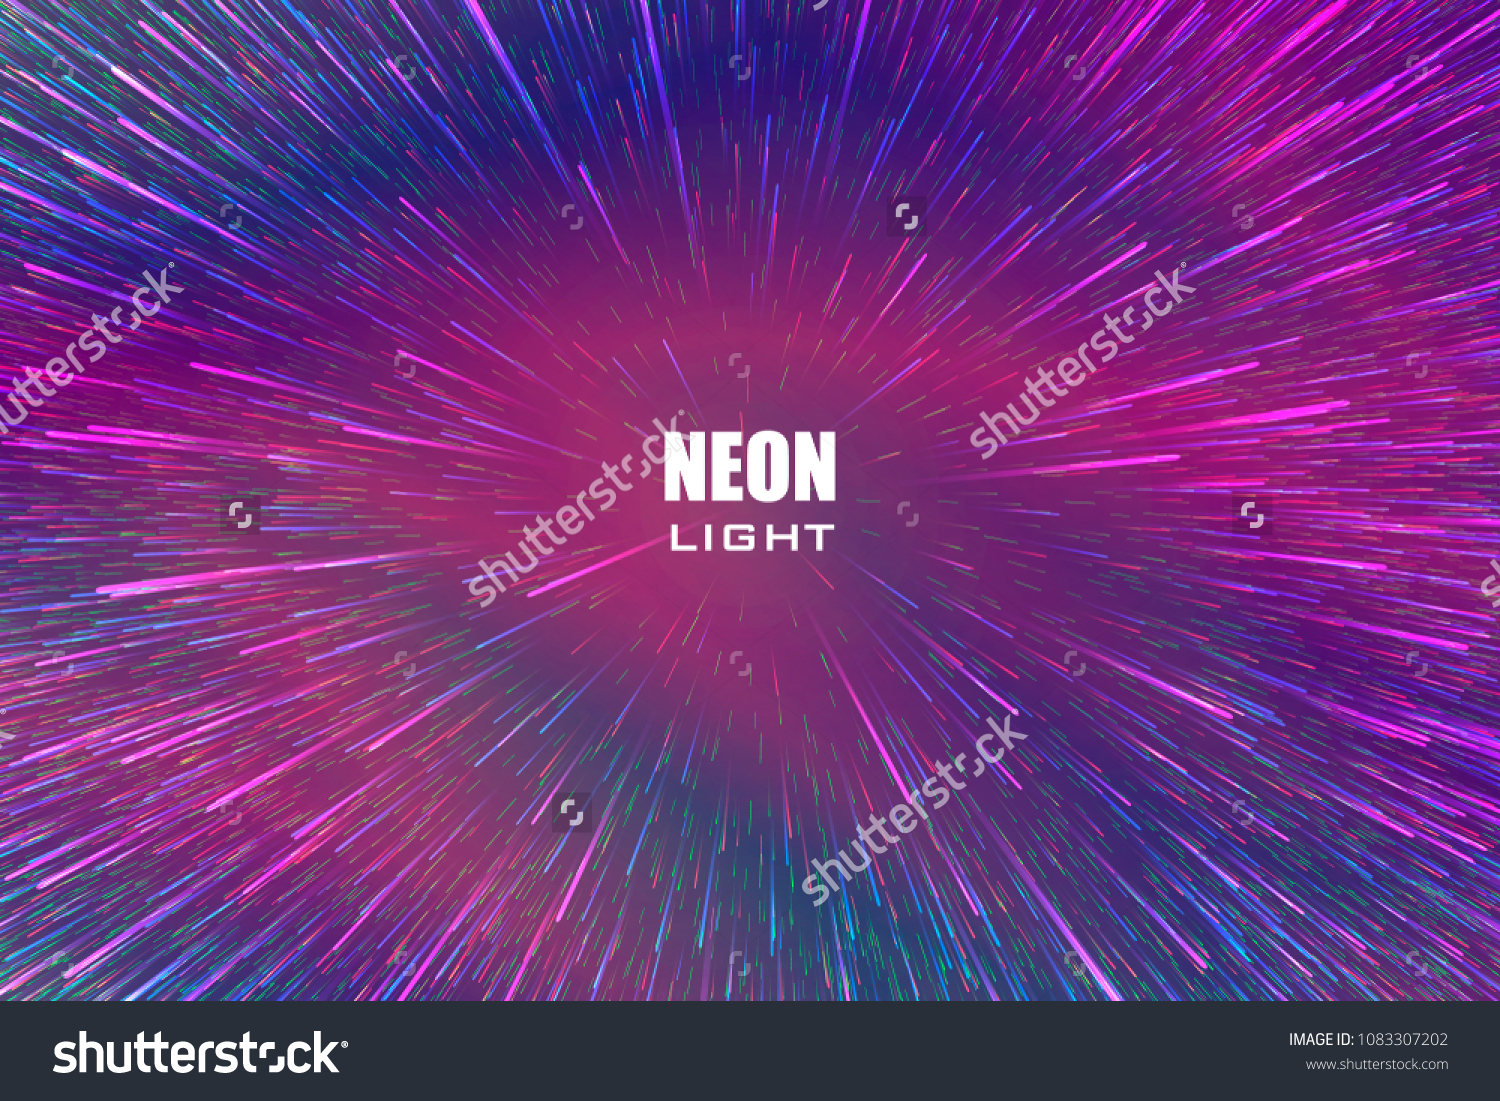 Light Rays Neon Radial Lines Background Stock Vector Royalty